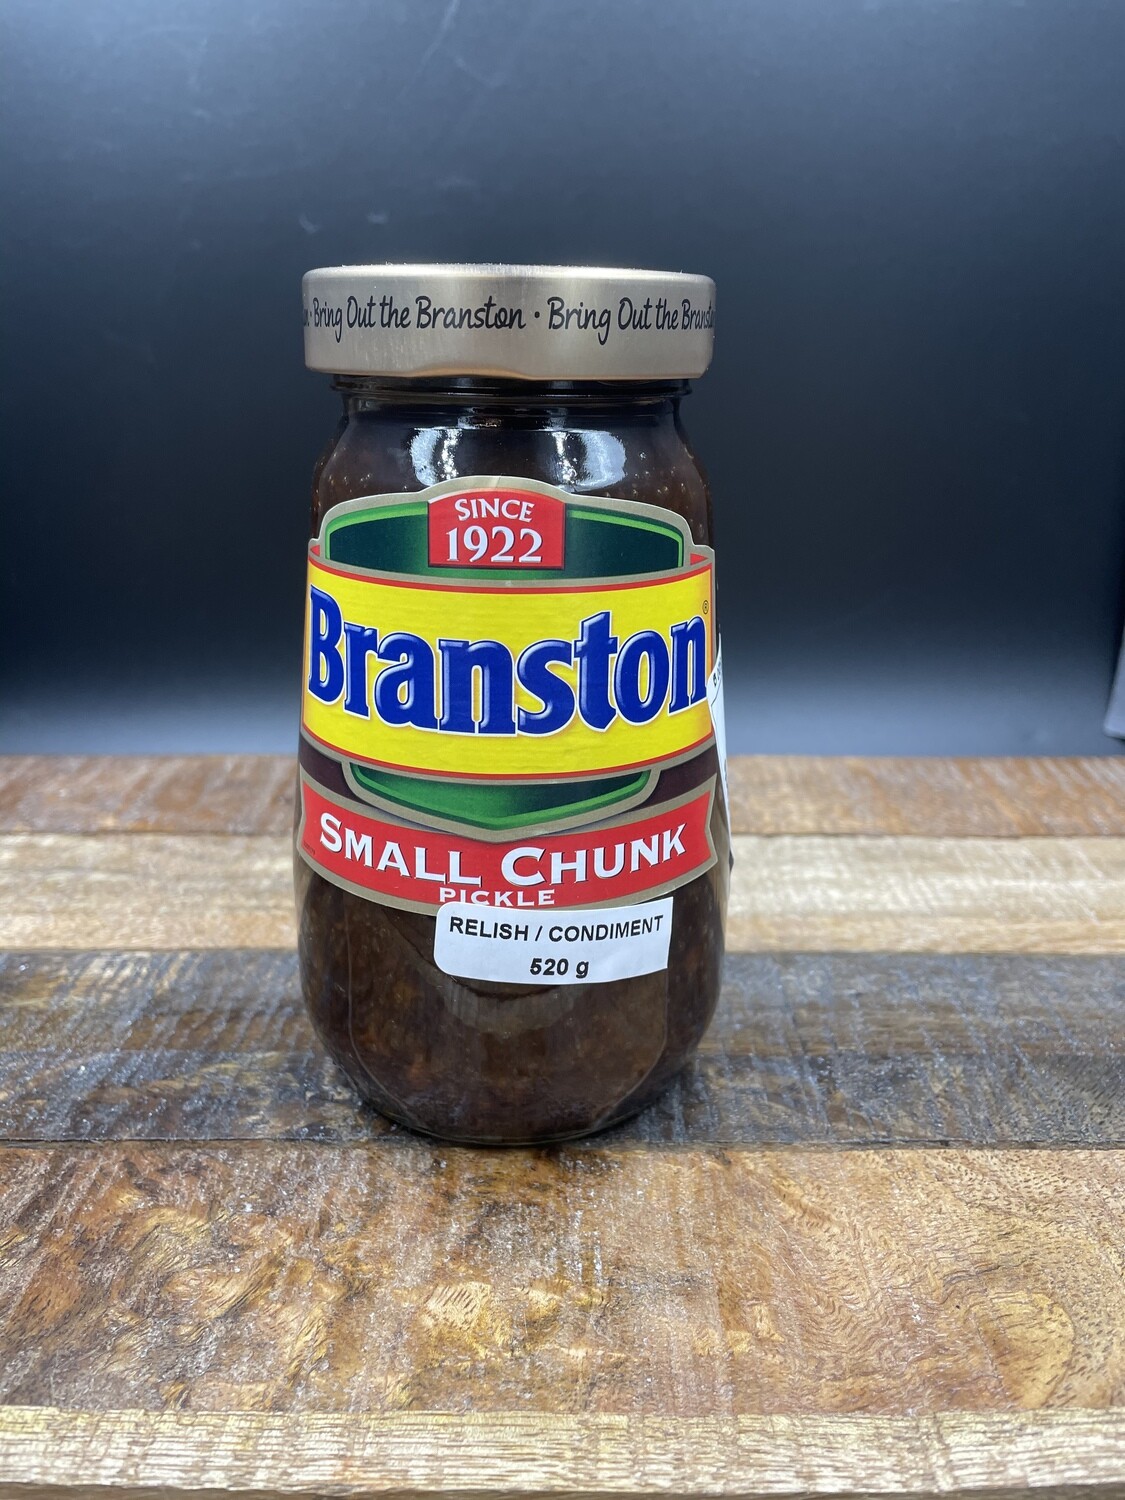 *PROMO* Branstons Small Chunk Pickle 520g *PROMO*